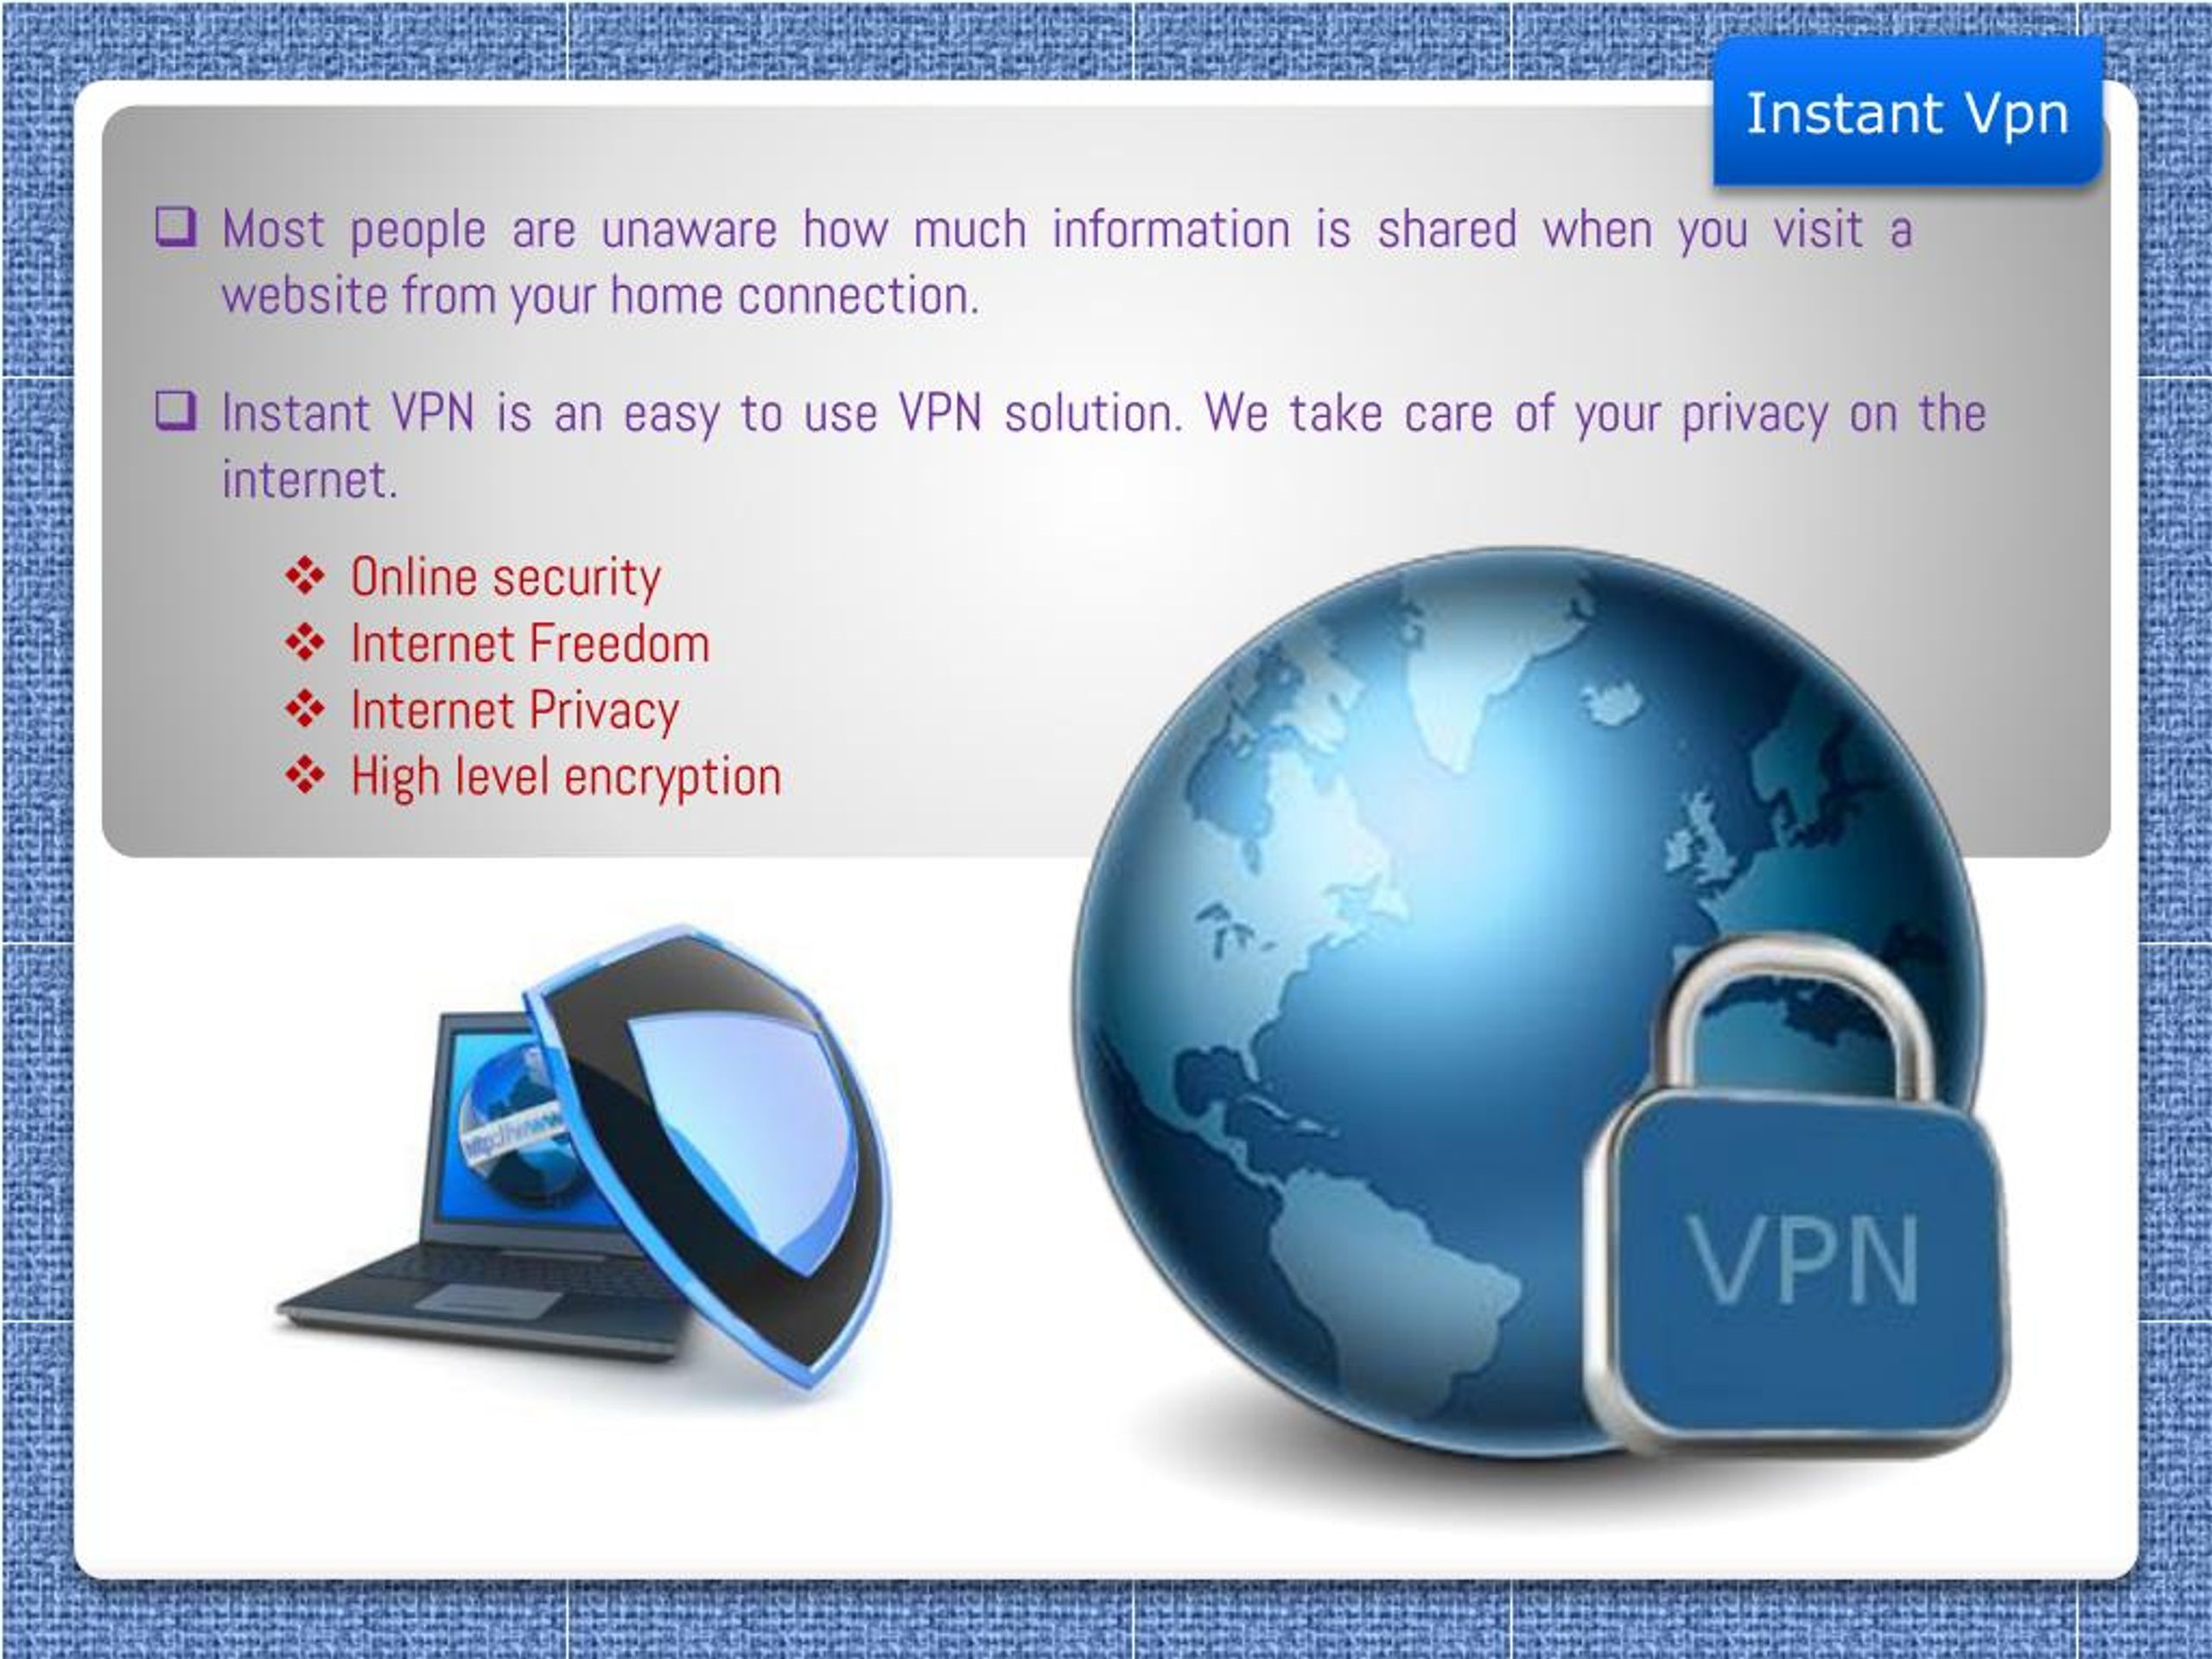 difference between anonymizer and vpn makers